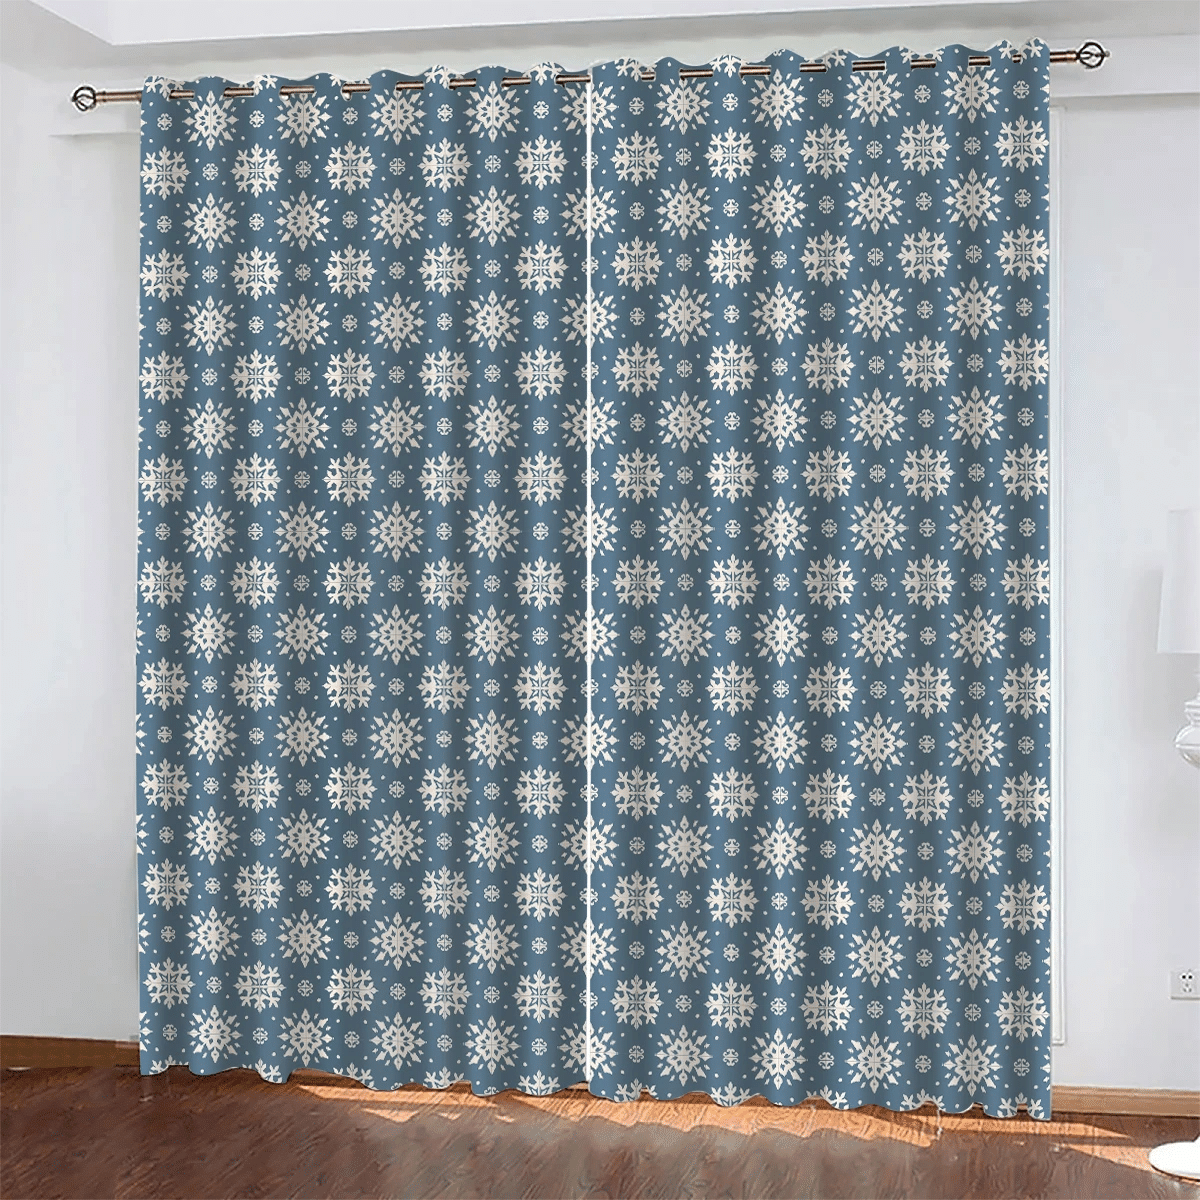 Nordic Style Drawing With Snowflakes Pattern Window Curtains Door Curtains Home Decor